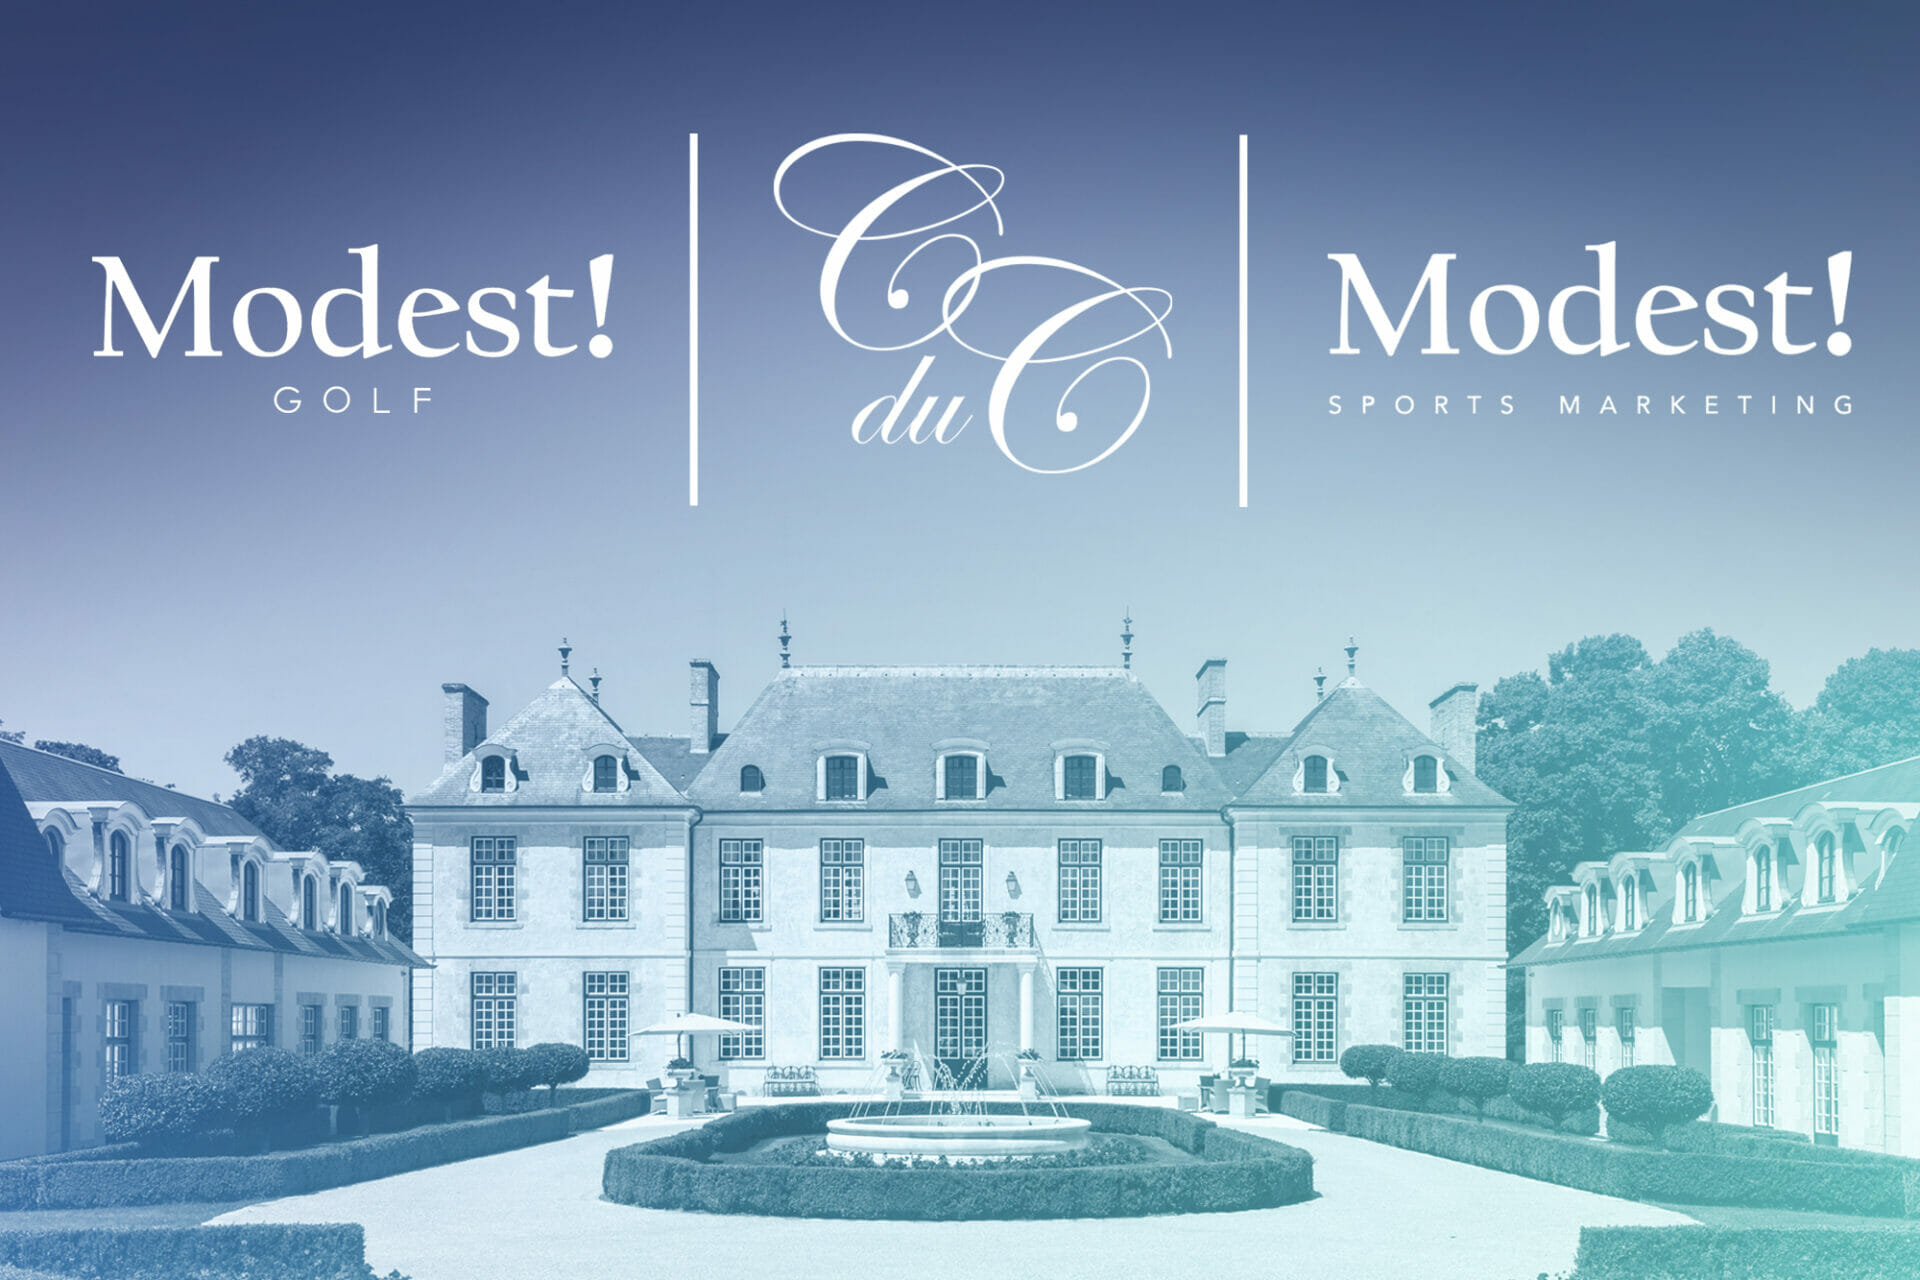 Modest! Sports Marketing & Modest! Golf Group to partner The Condor Club at Château du Coudreceau